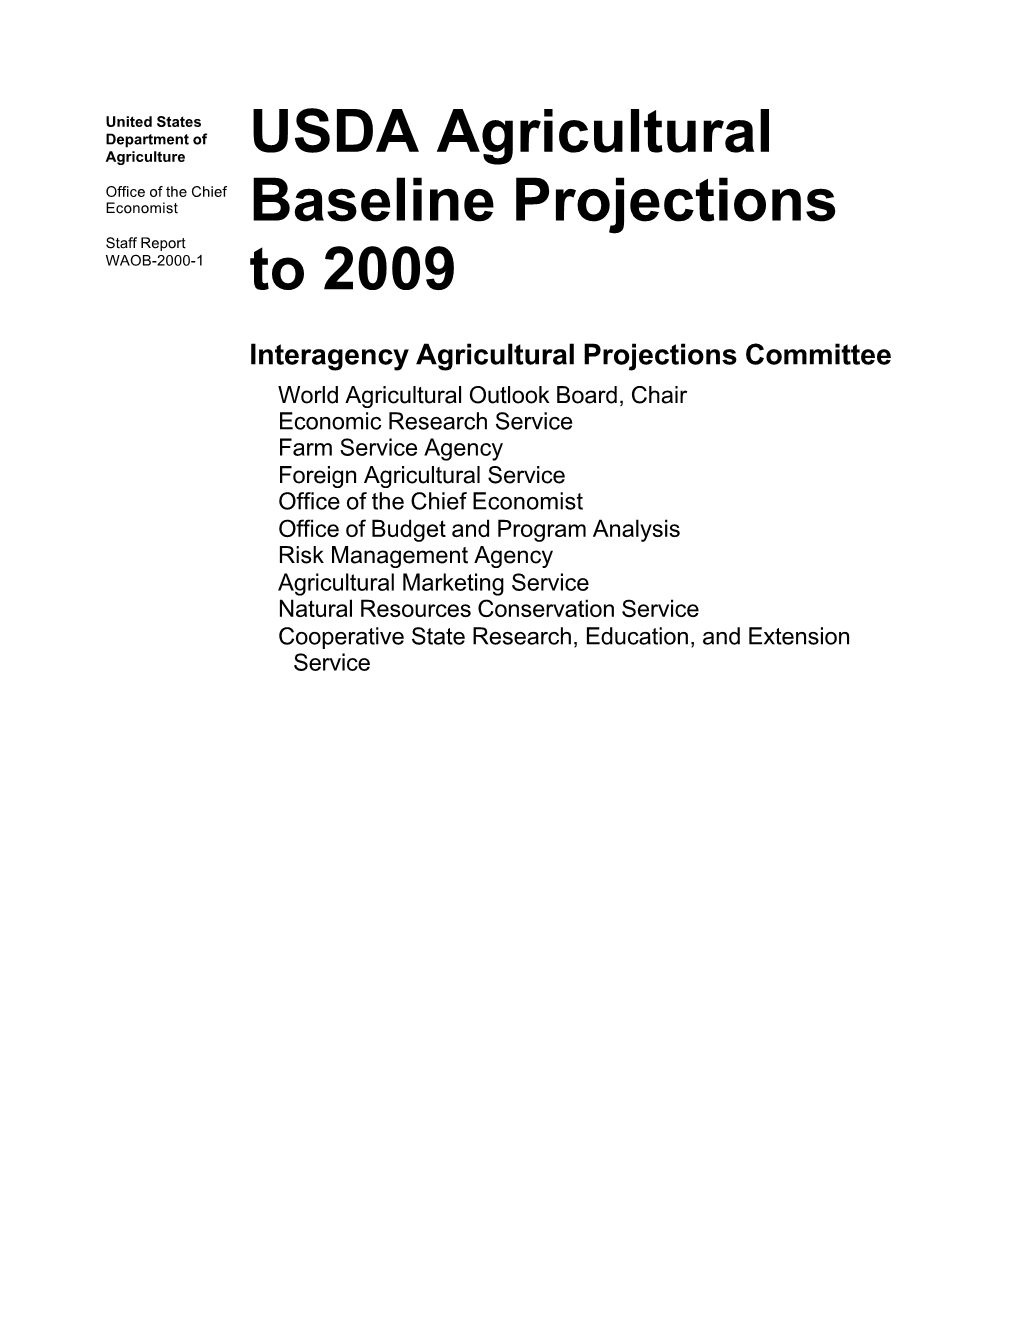 USDA Agricultural Baseline Projections to 2009 (WAOB-2000-1)